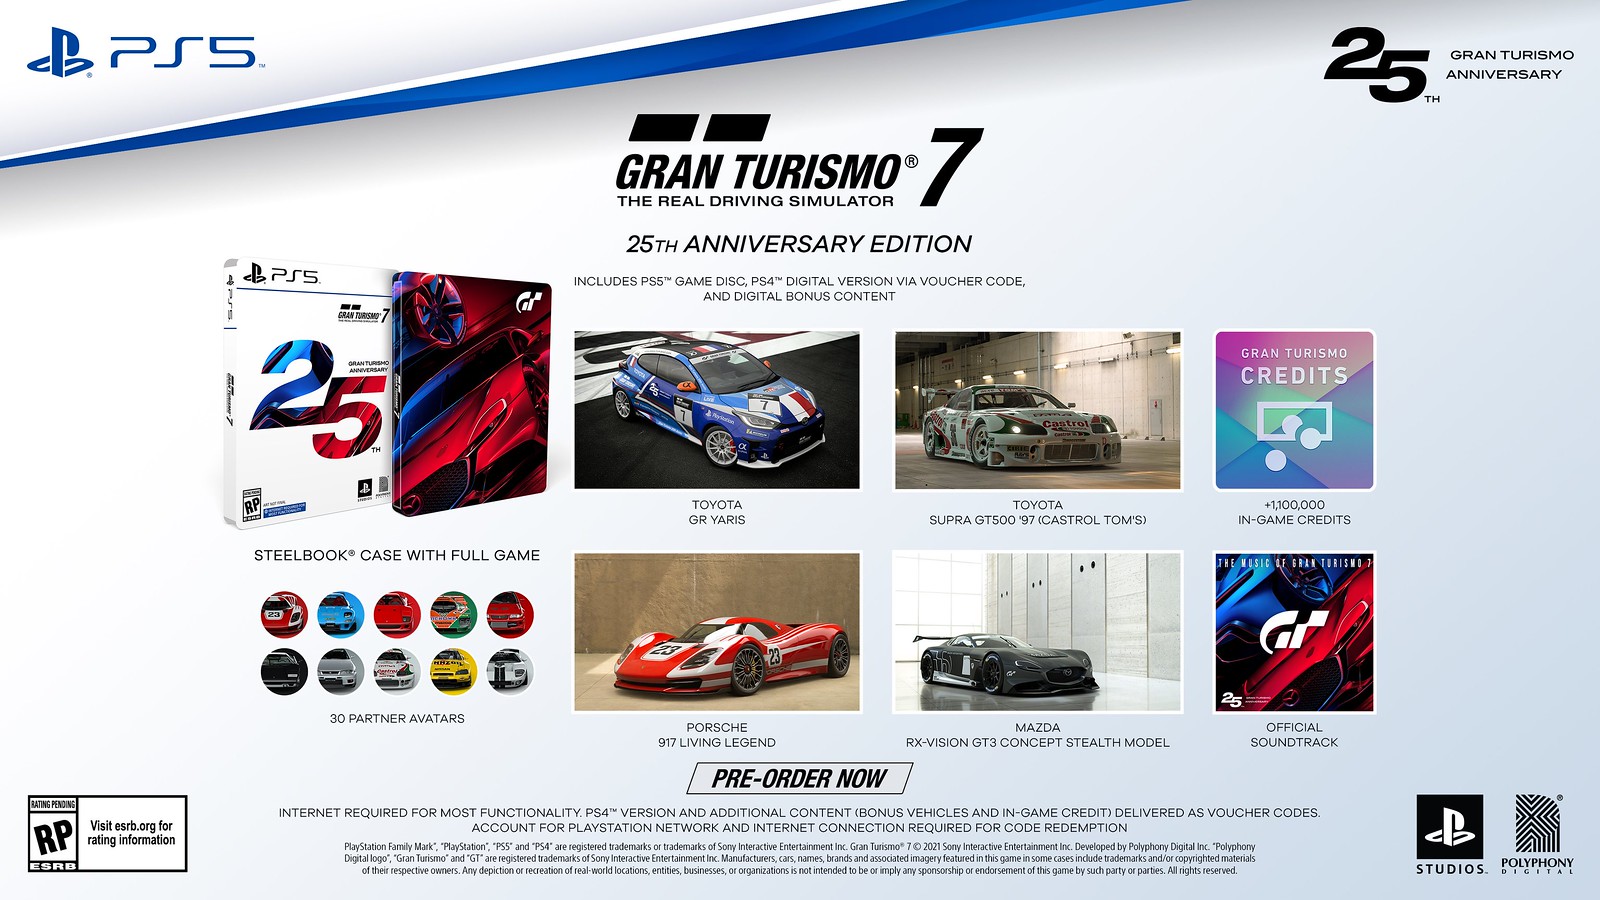 Gran Turismo 7 (Sony Playstation 4, 2022) Data Disc Only MISSING PLAY DISC